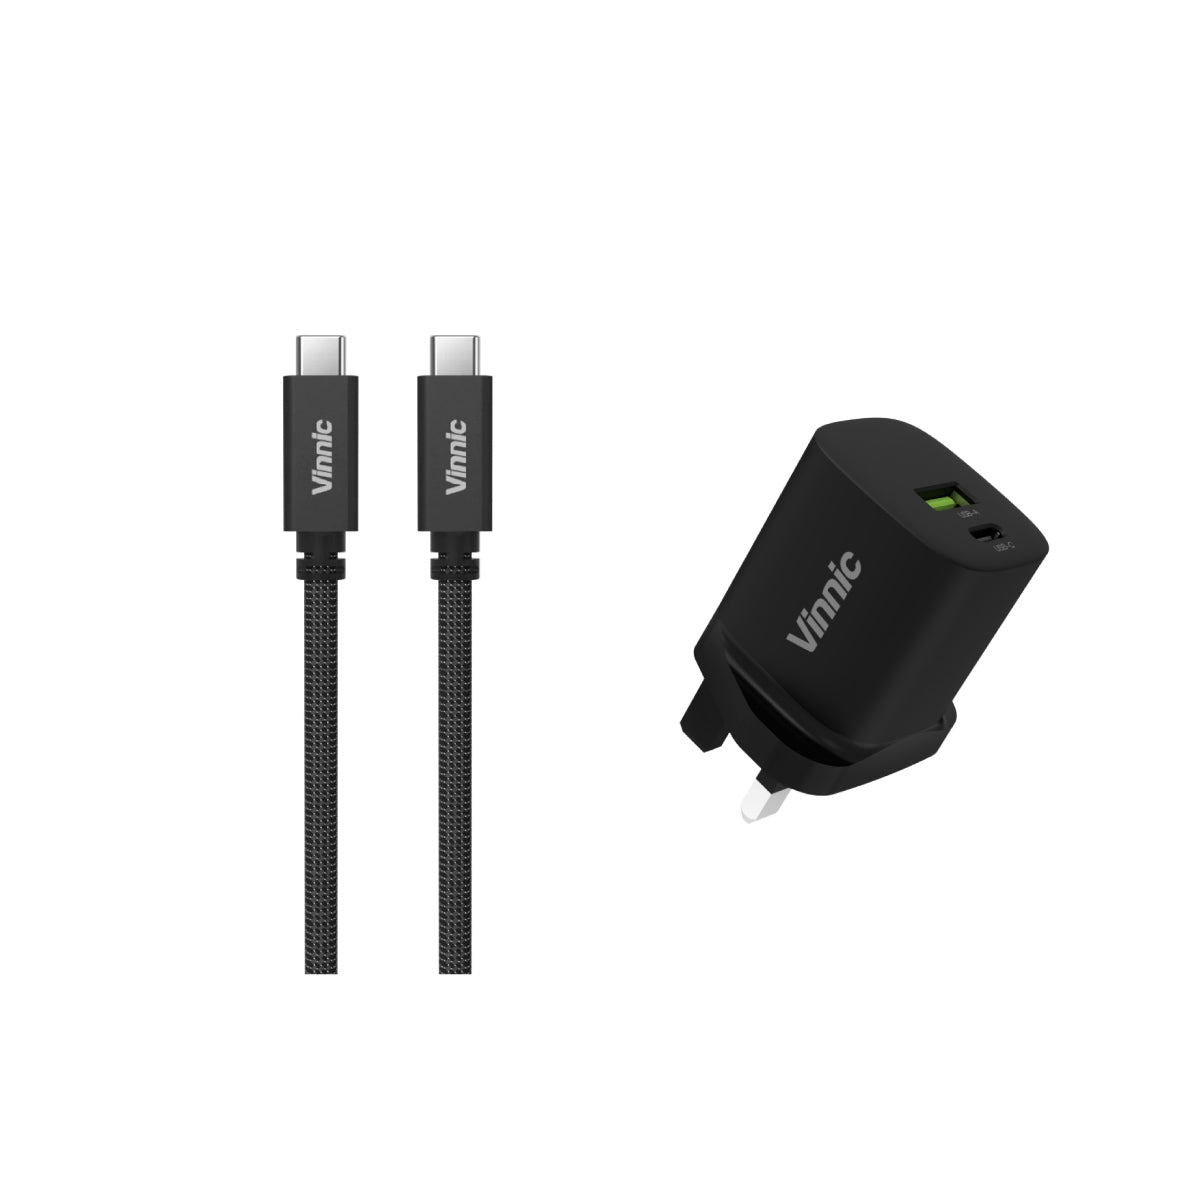 【Bundle Deal】Vinnic FERNOW 30W 2 ports Charger + 8K 100W USB-C to USB-C Cable - Shadow